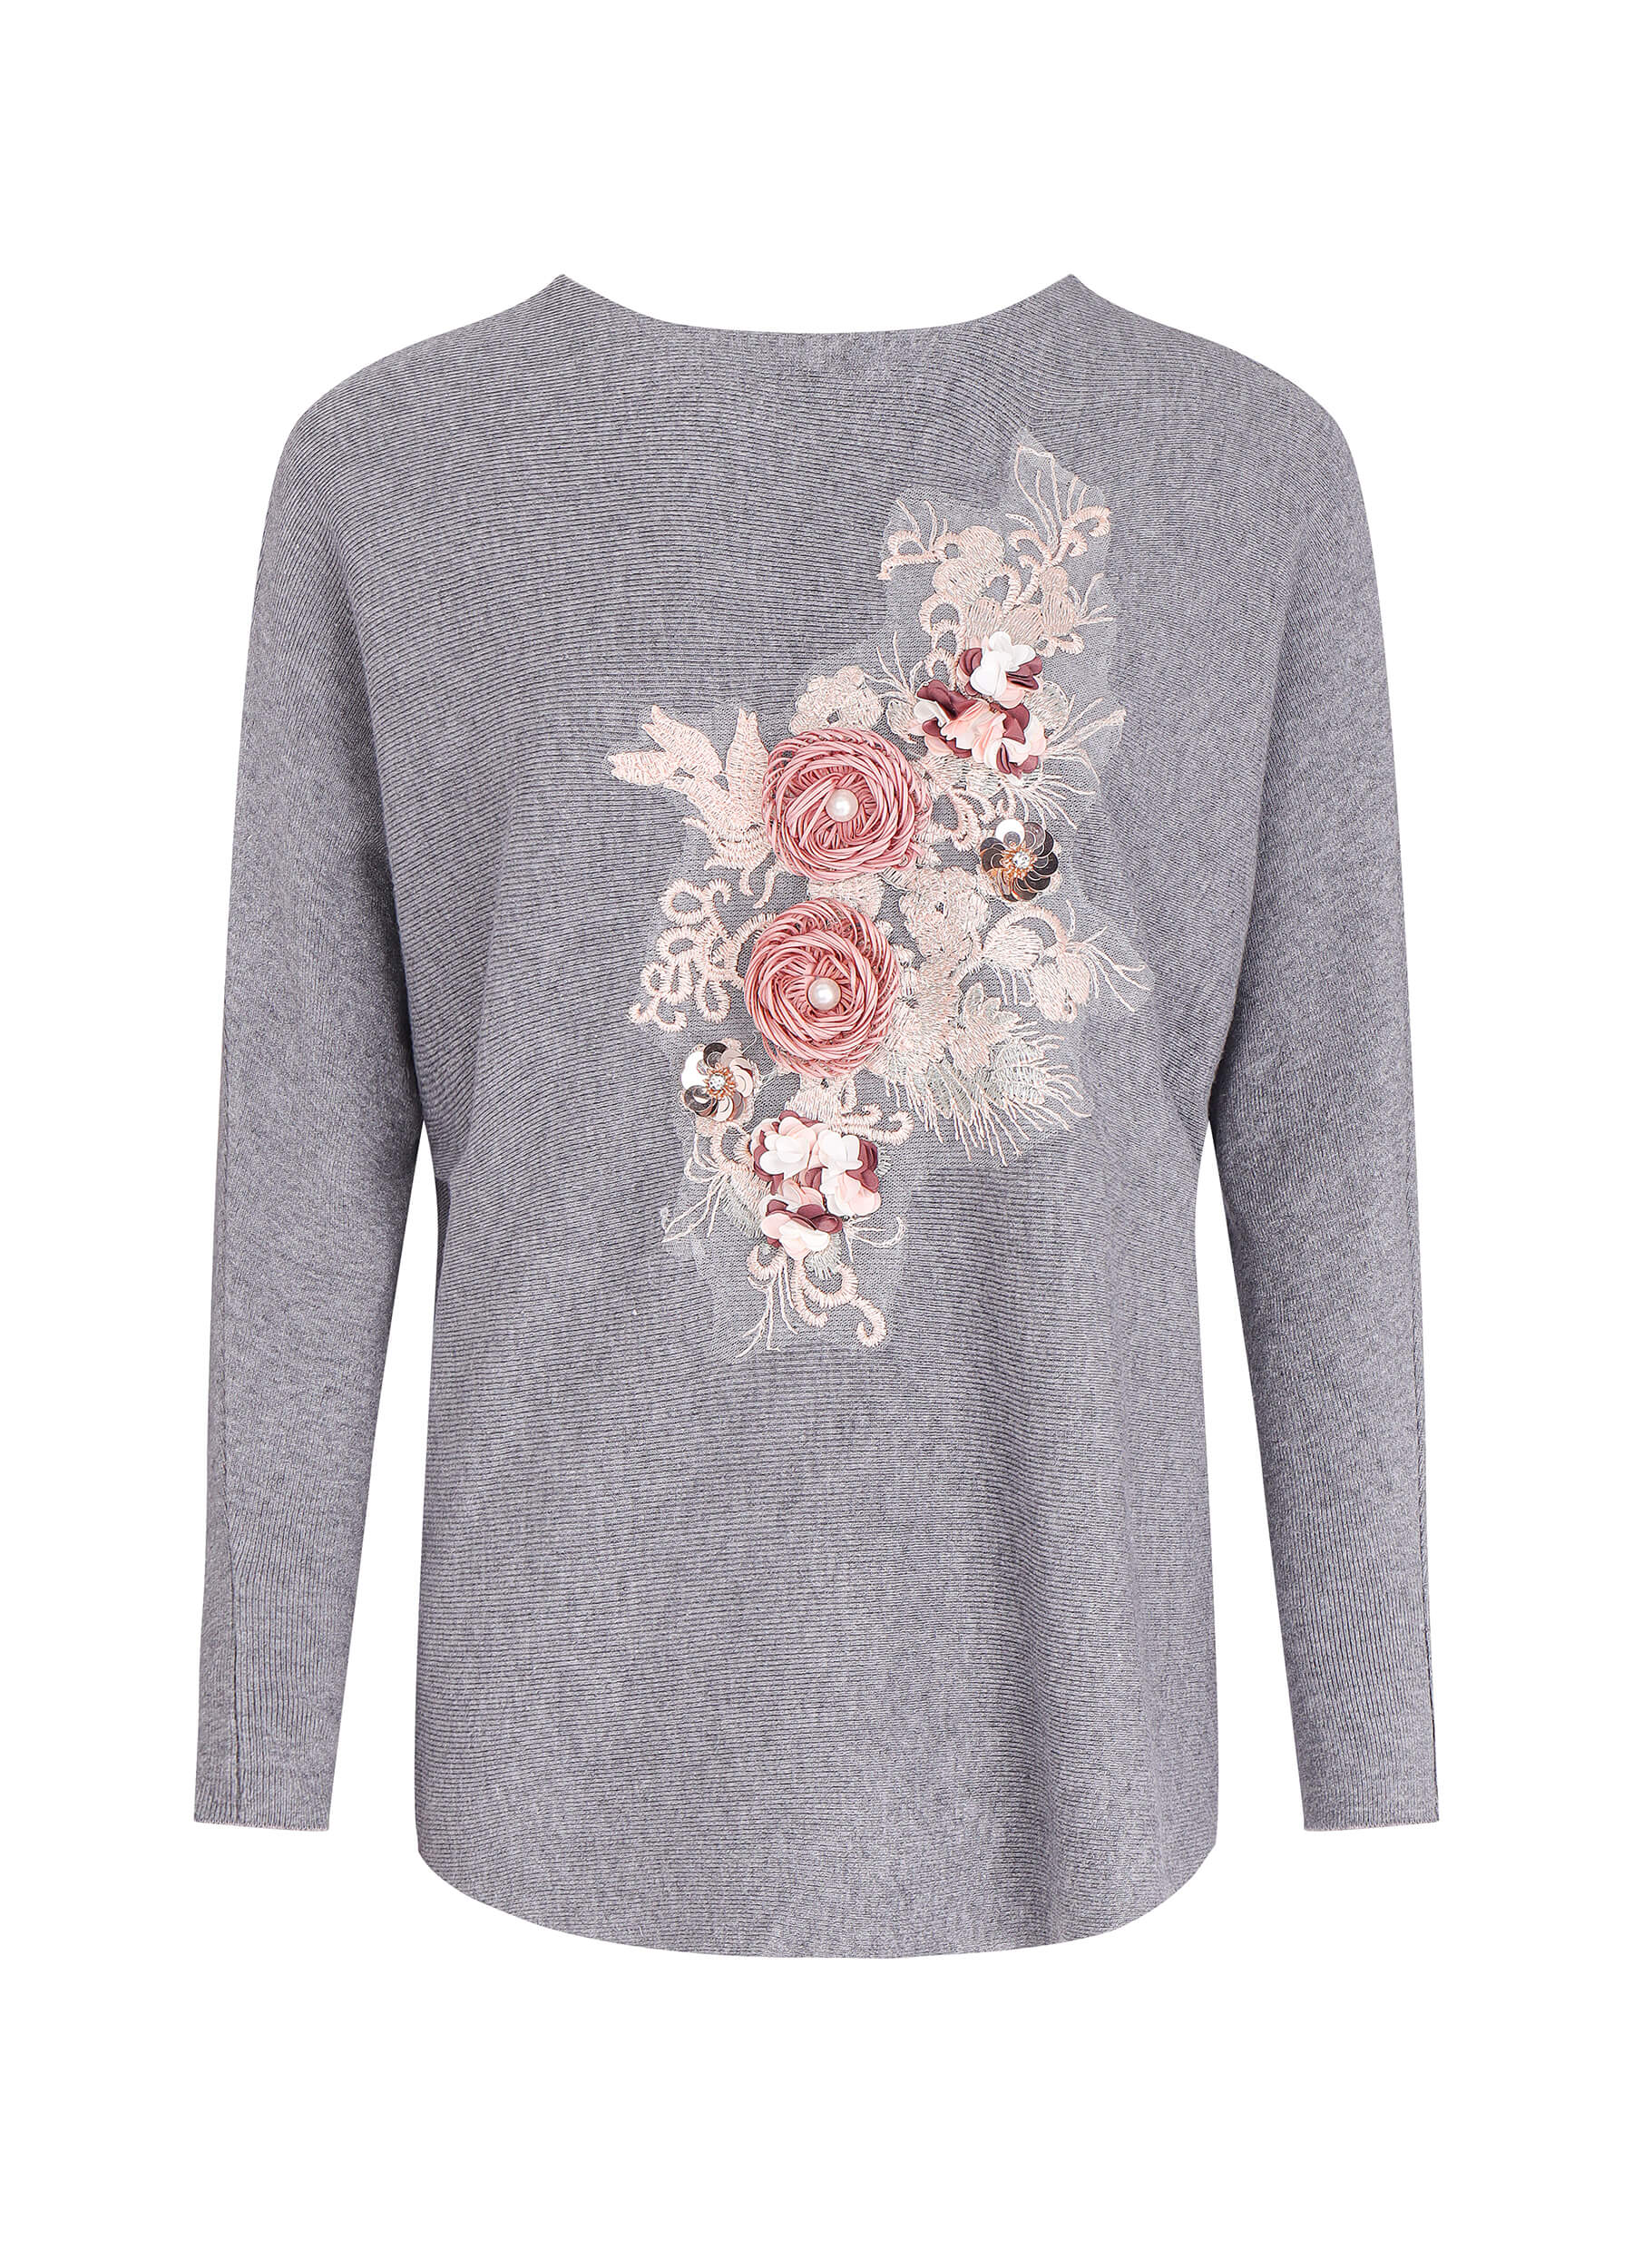 FINEPEEK Women's Fall 3D Floral Adorn Round Neck Long Sleeve Sweater-Grey